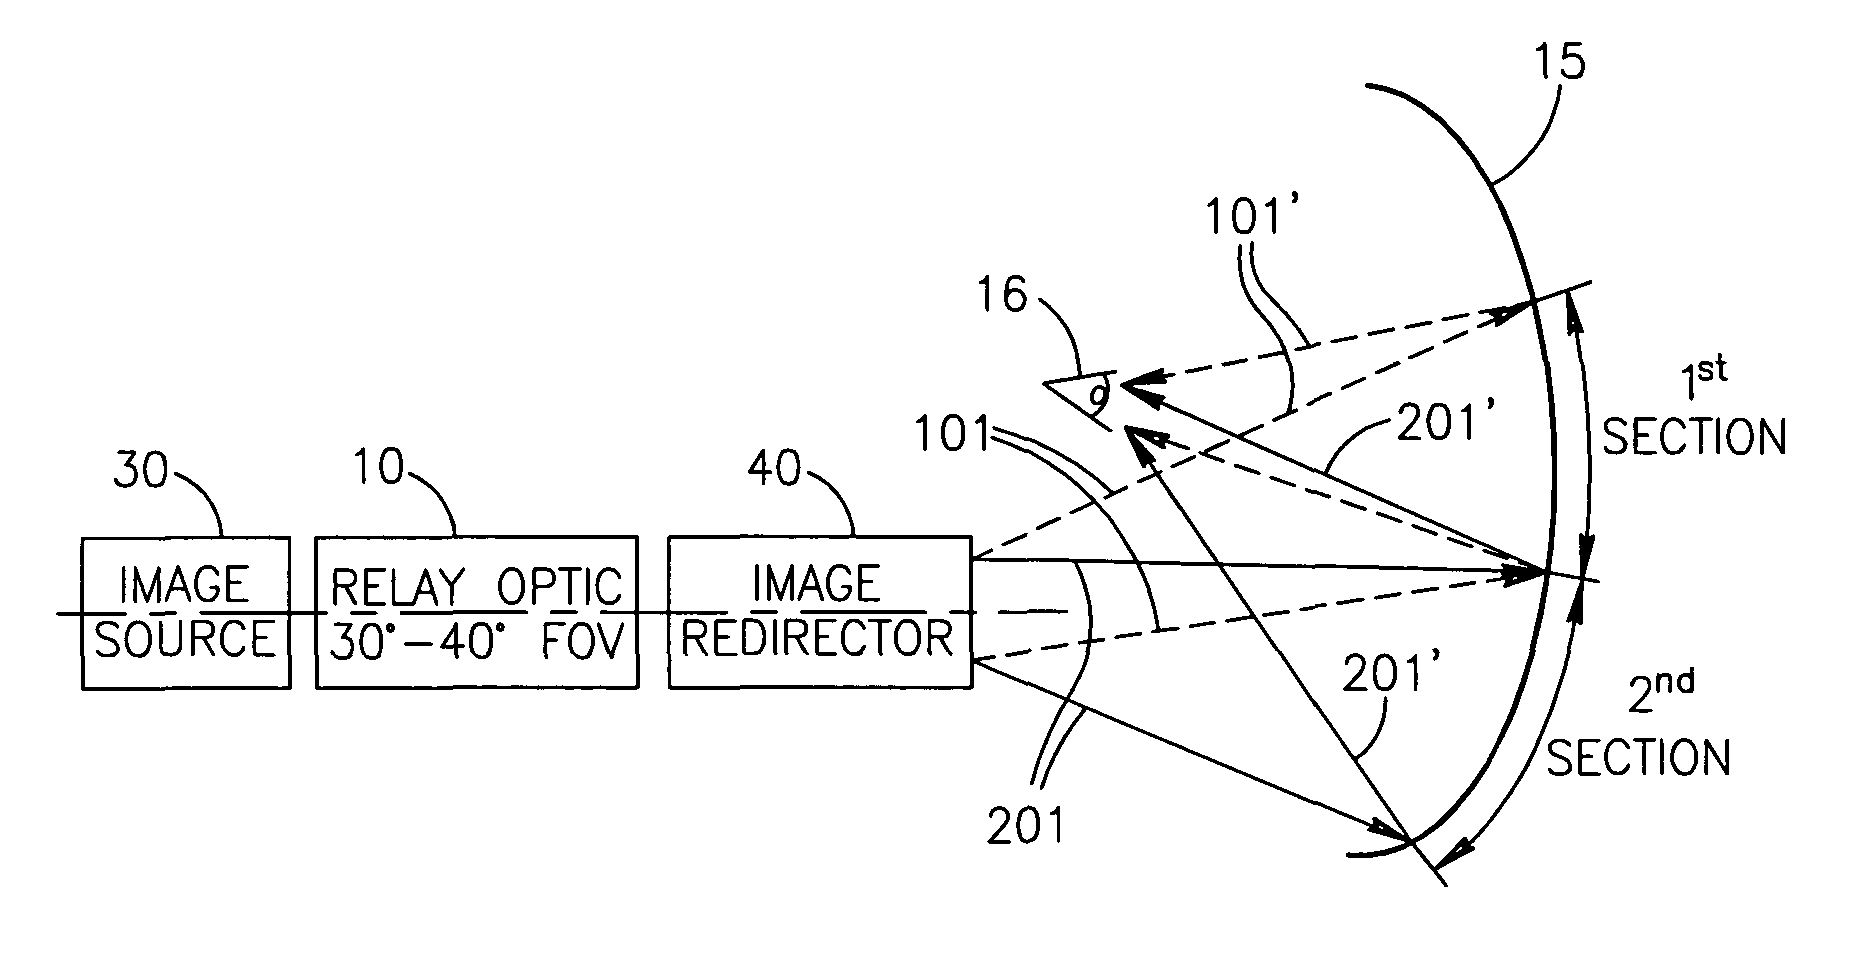 Personal display system with extended field of view